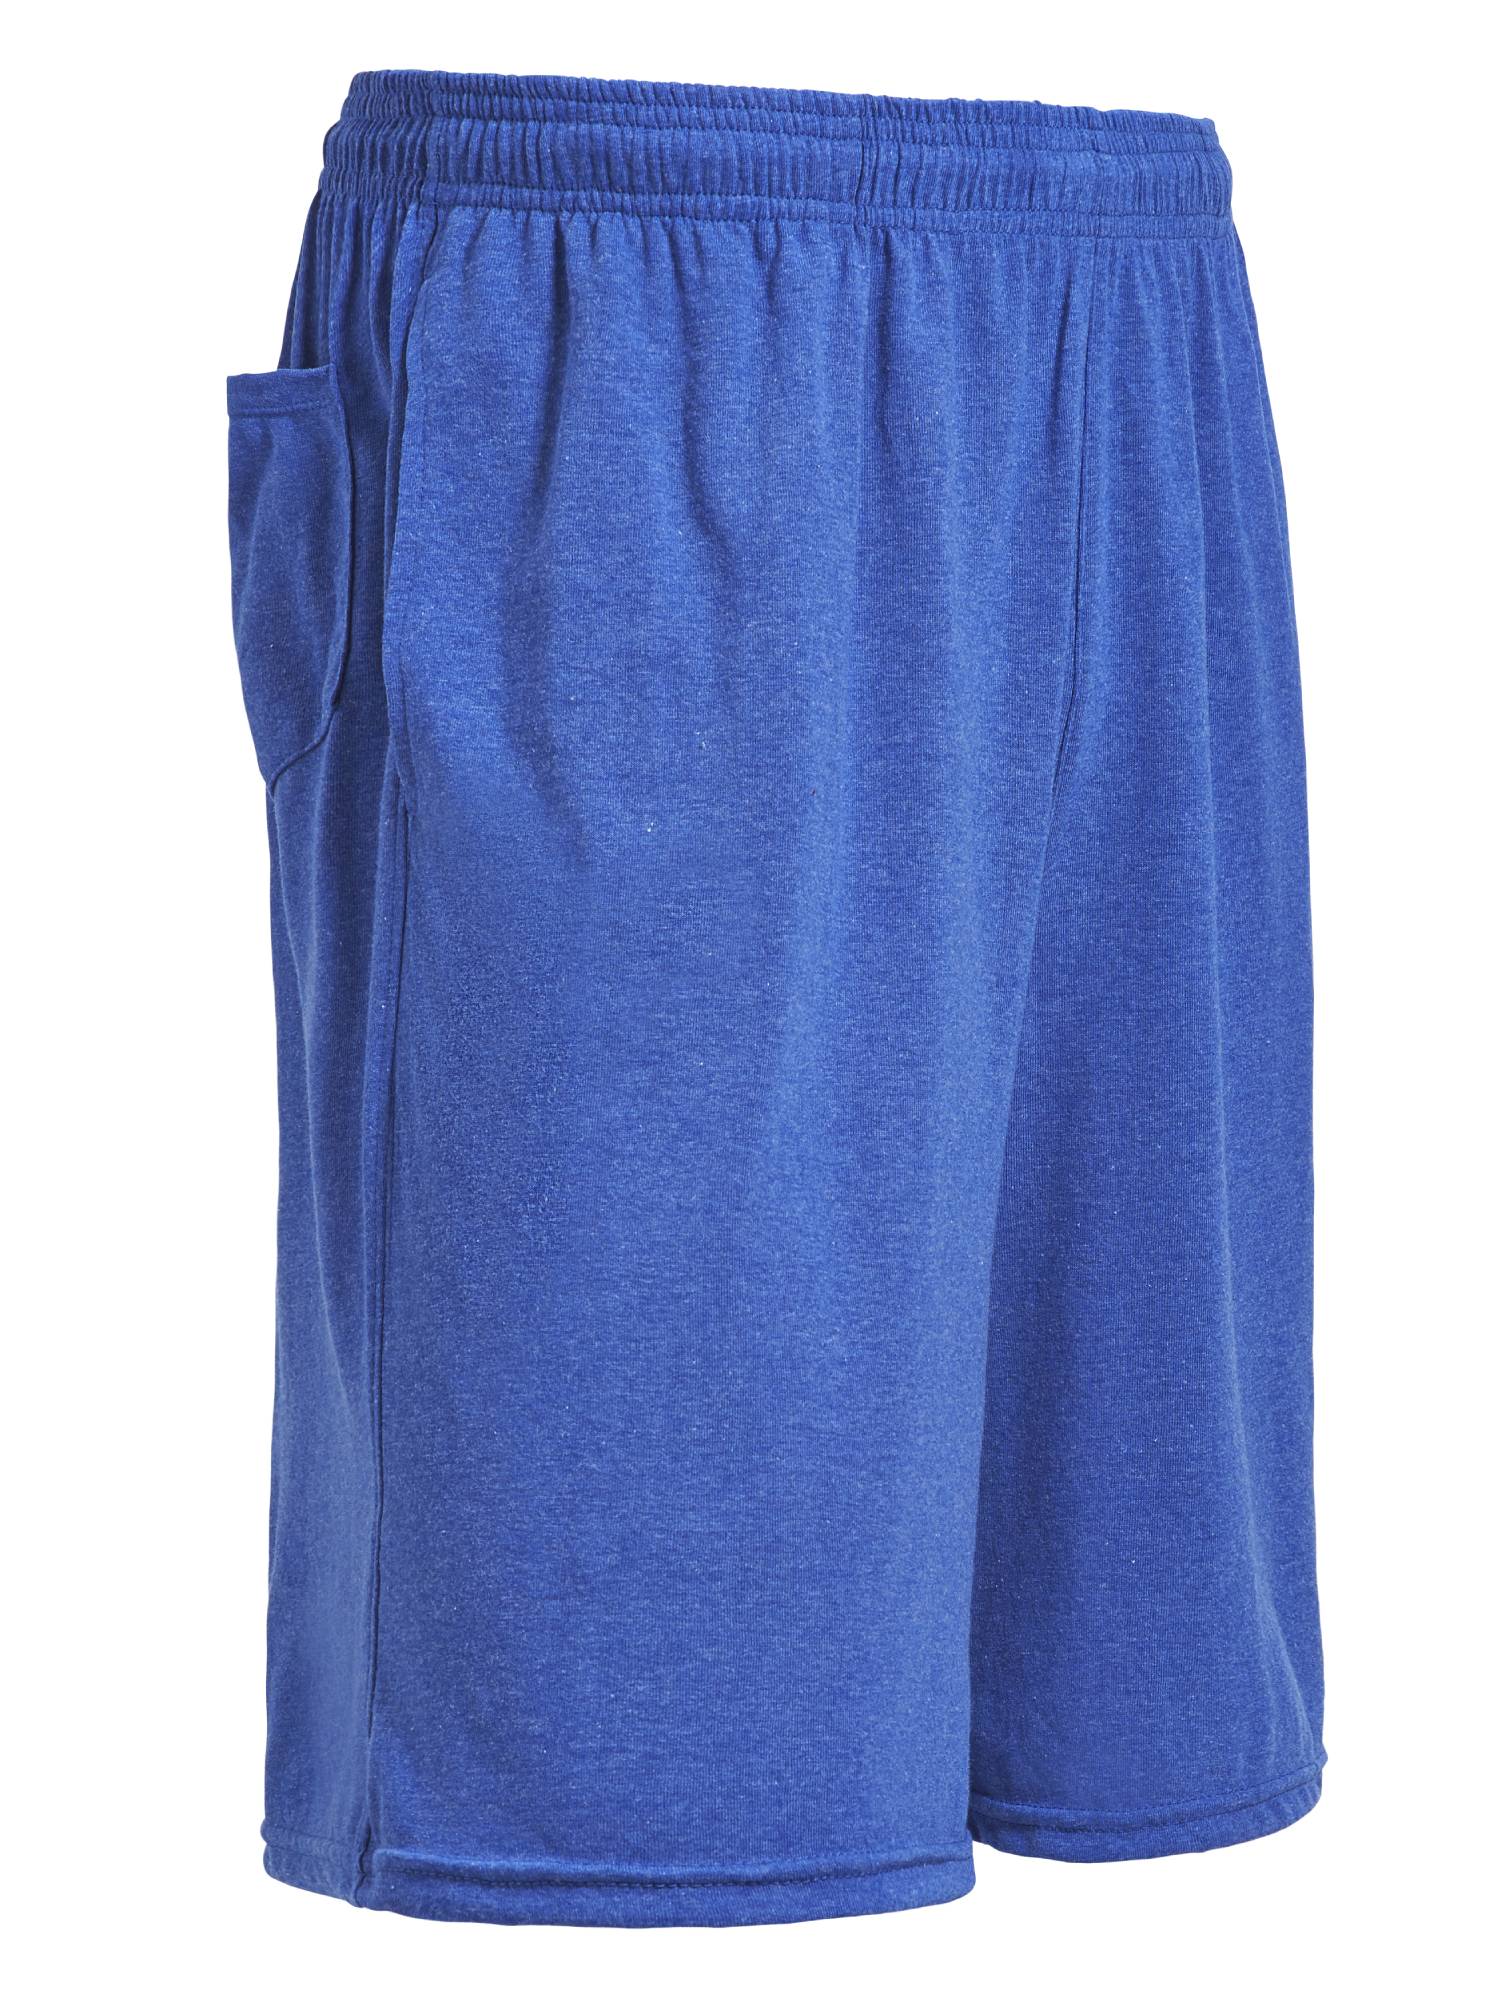 Men's Performance Heather Shorts with Pockets